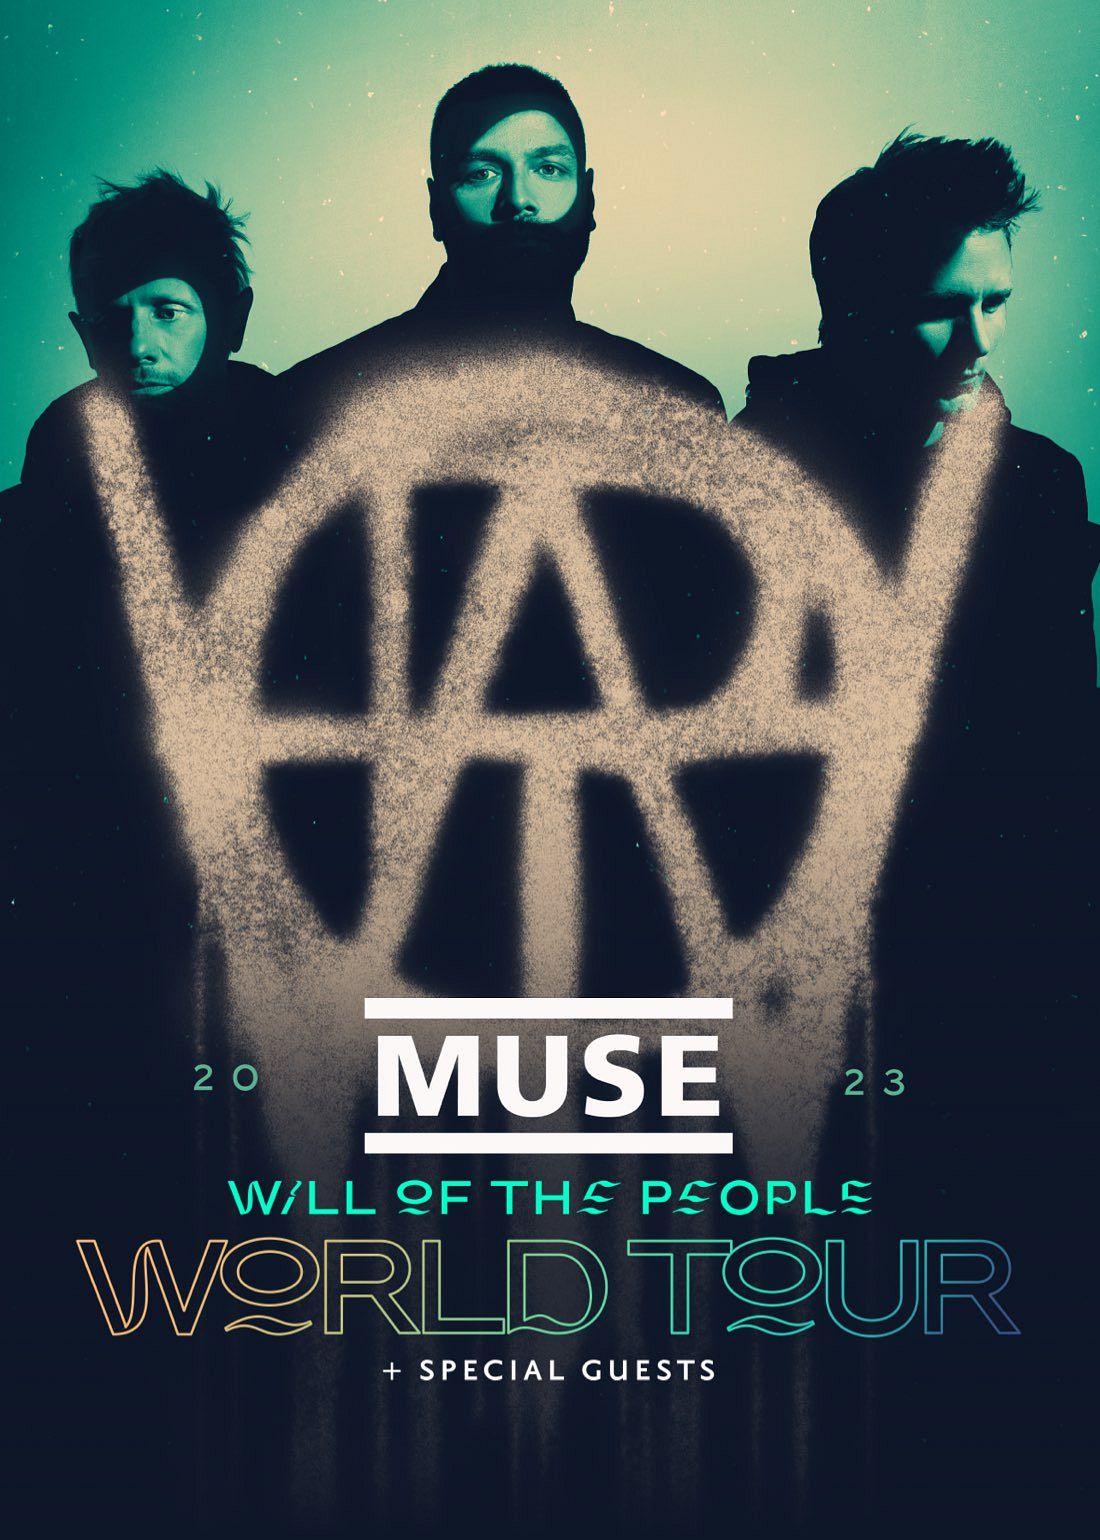 Muse Tickets at Bellahouston Park in Glasgow by Muse [Glasgow